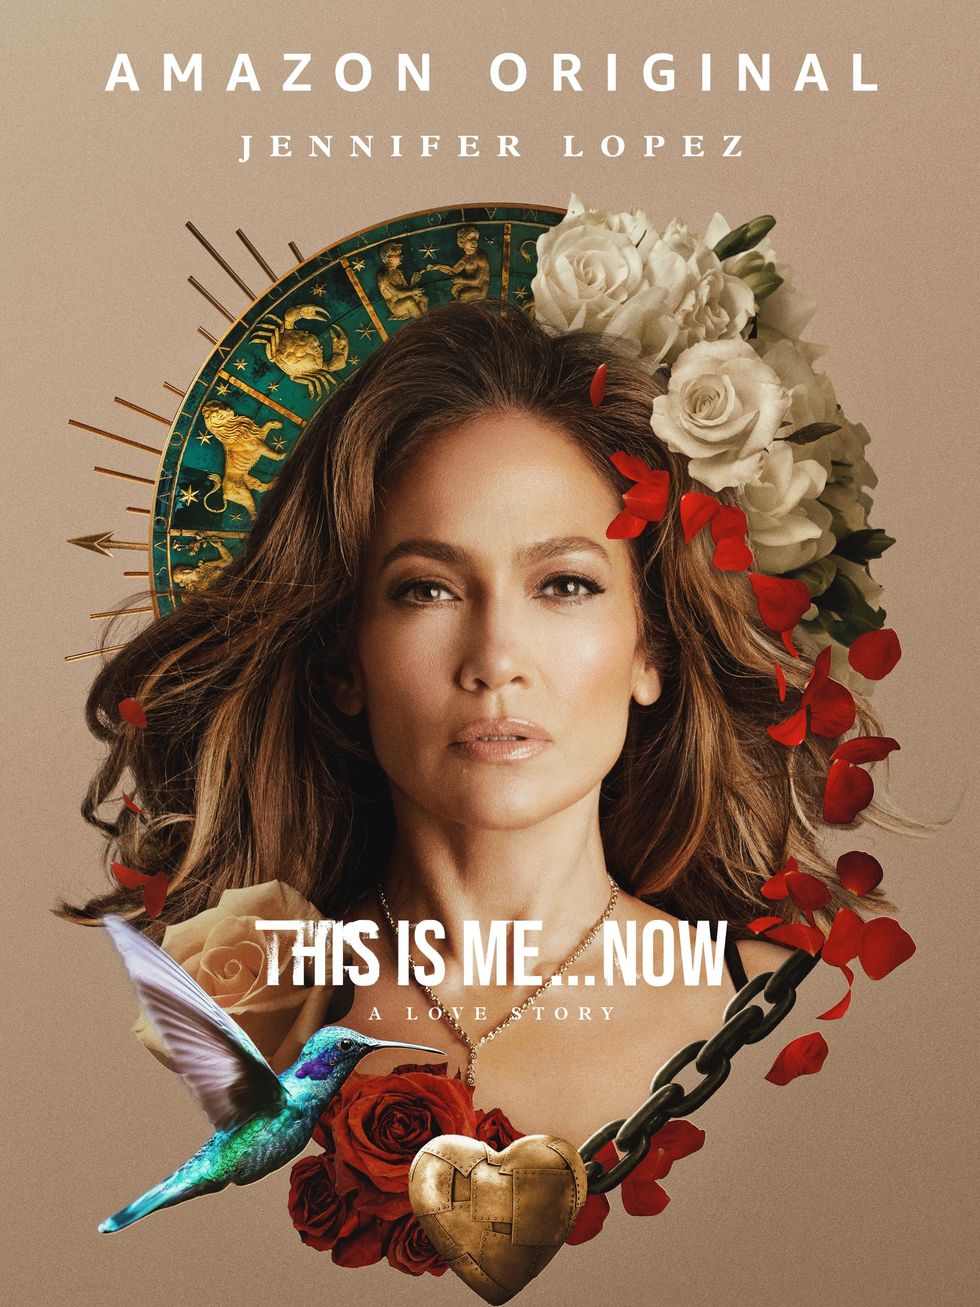 Jennifer Lopez's This Is Me…Now Album and Film: Everything to Know